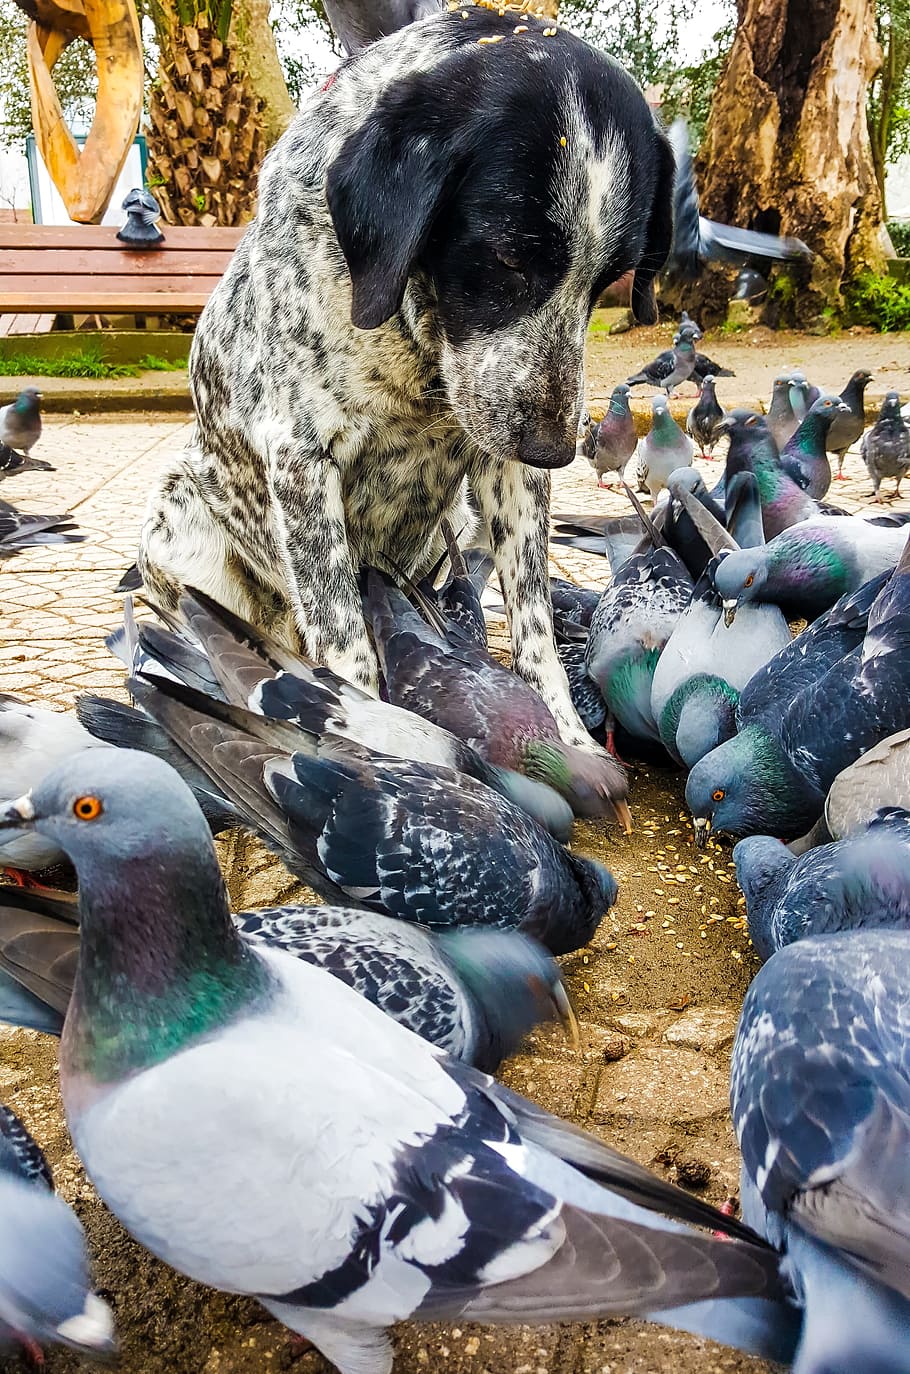 dog surrounded by flock of pigeons, Animal, Bird, Background